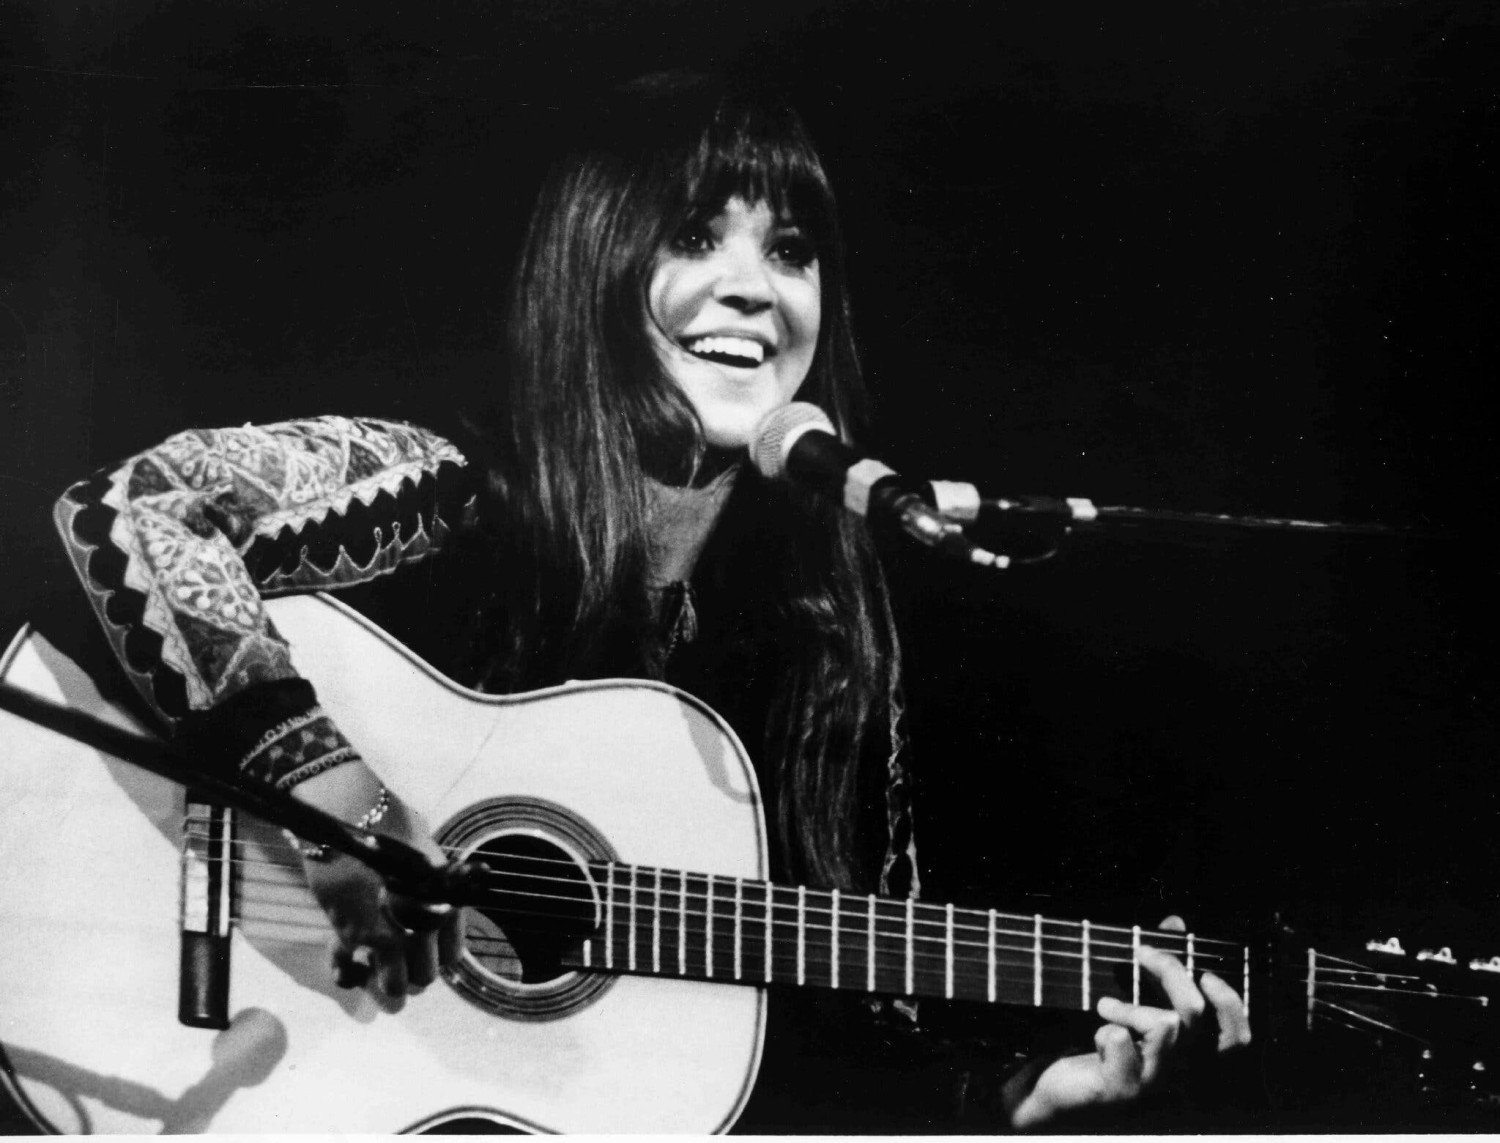 The singer and songwriter Melanie in an undated photo. She was one of only three women who performed unaccompanied at the Woodstock festival in 1969.Credit...Universal Images Group via Getty Images